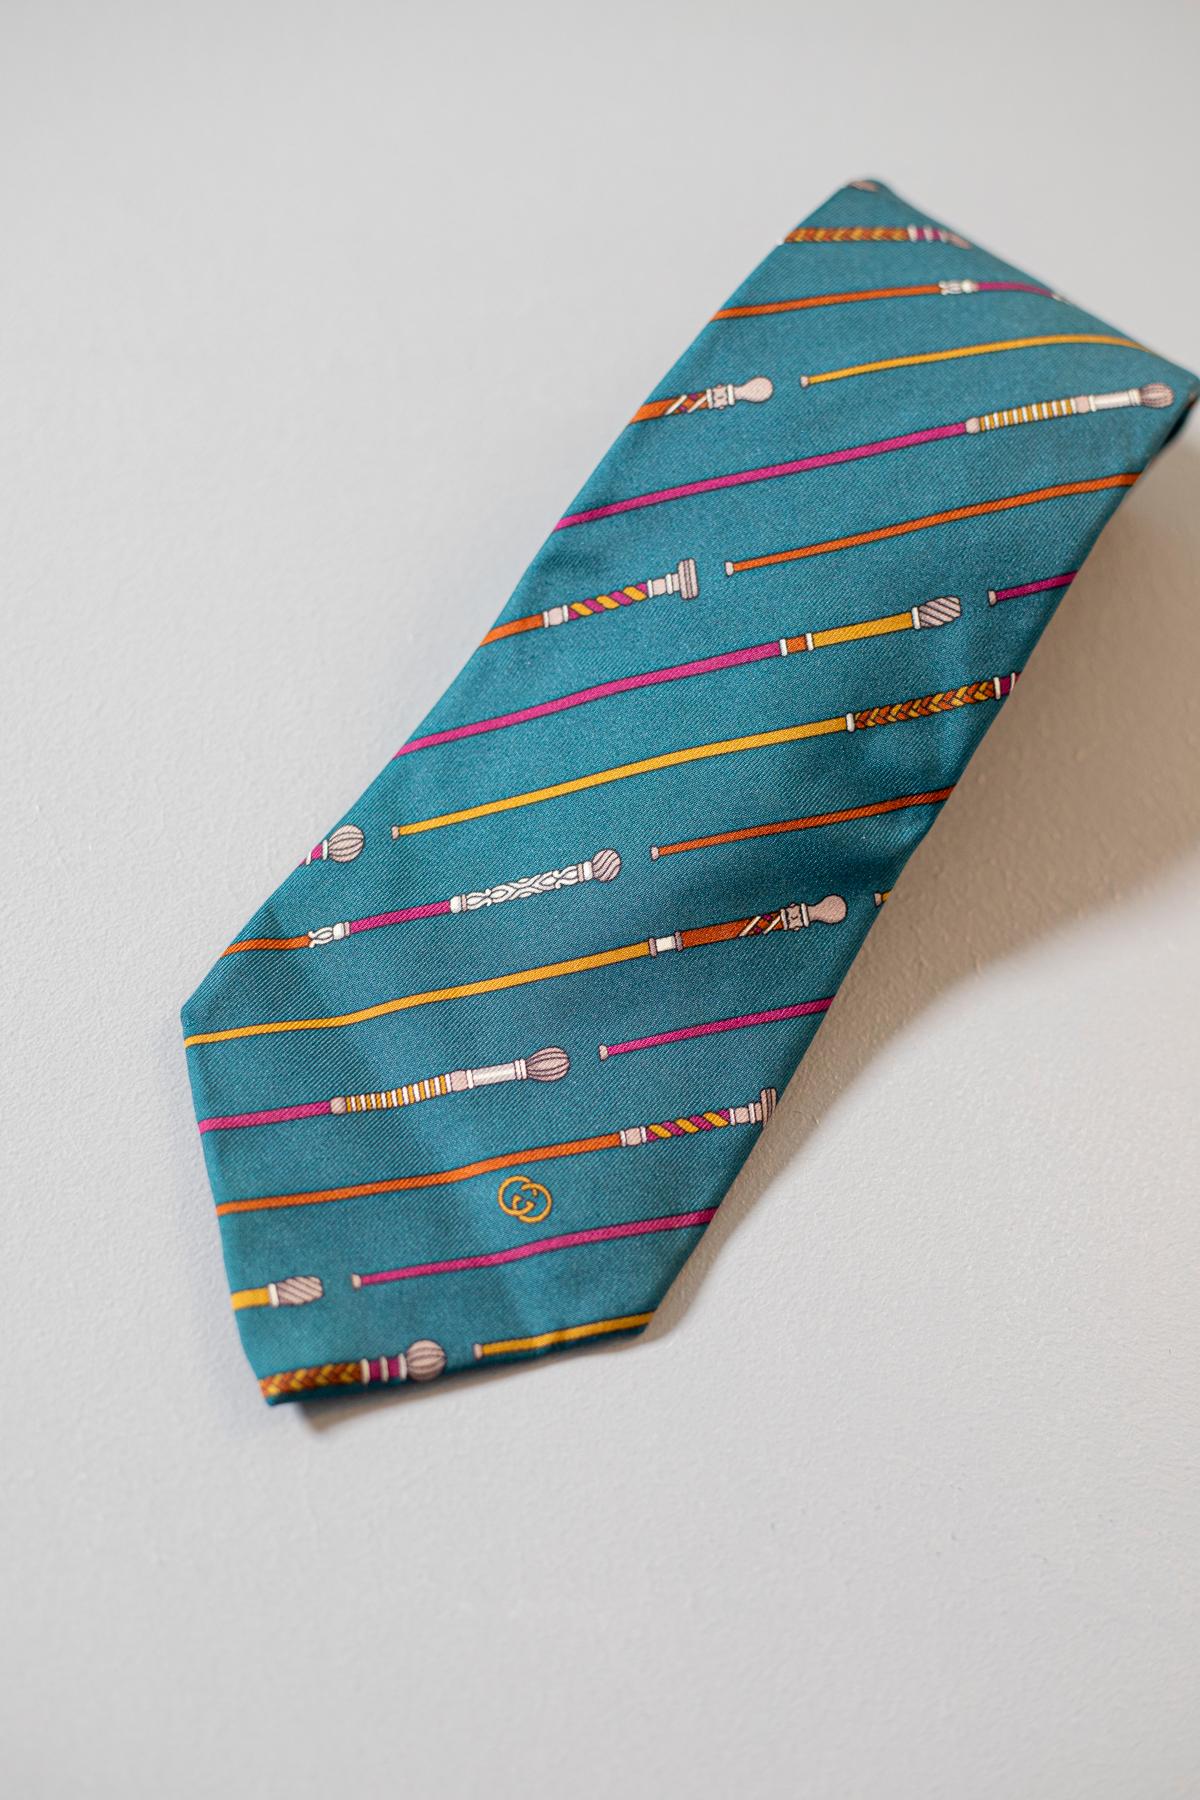 Designed by Gucci, this tie is made in all silk. This accessory is simple yet elegant and displays colourful walking sticks on a quetzal green background. This tie is perfect for every occasion, since it is classy and tasteful.